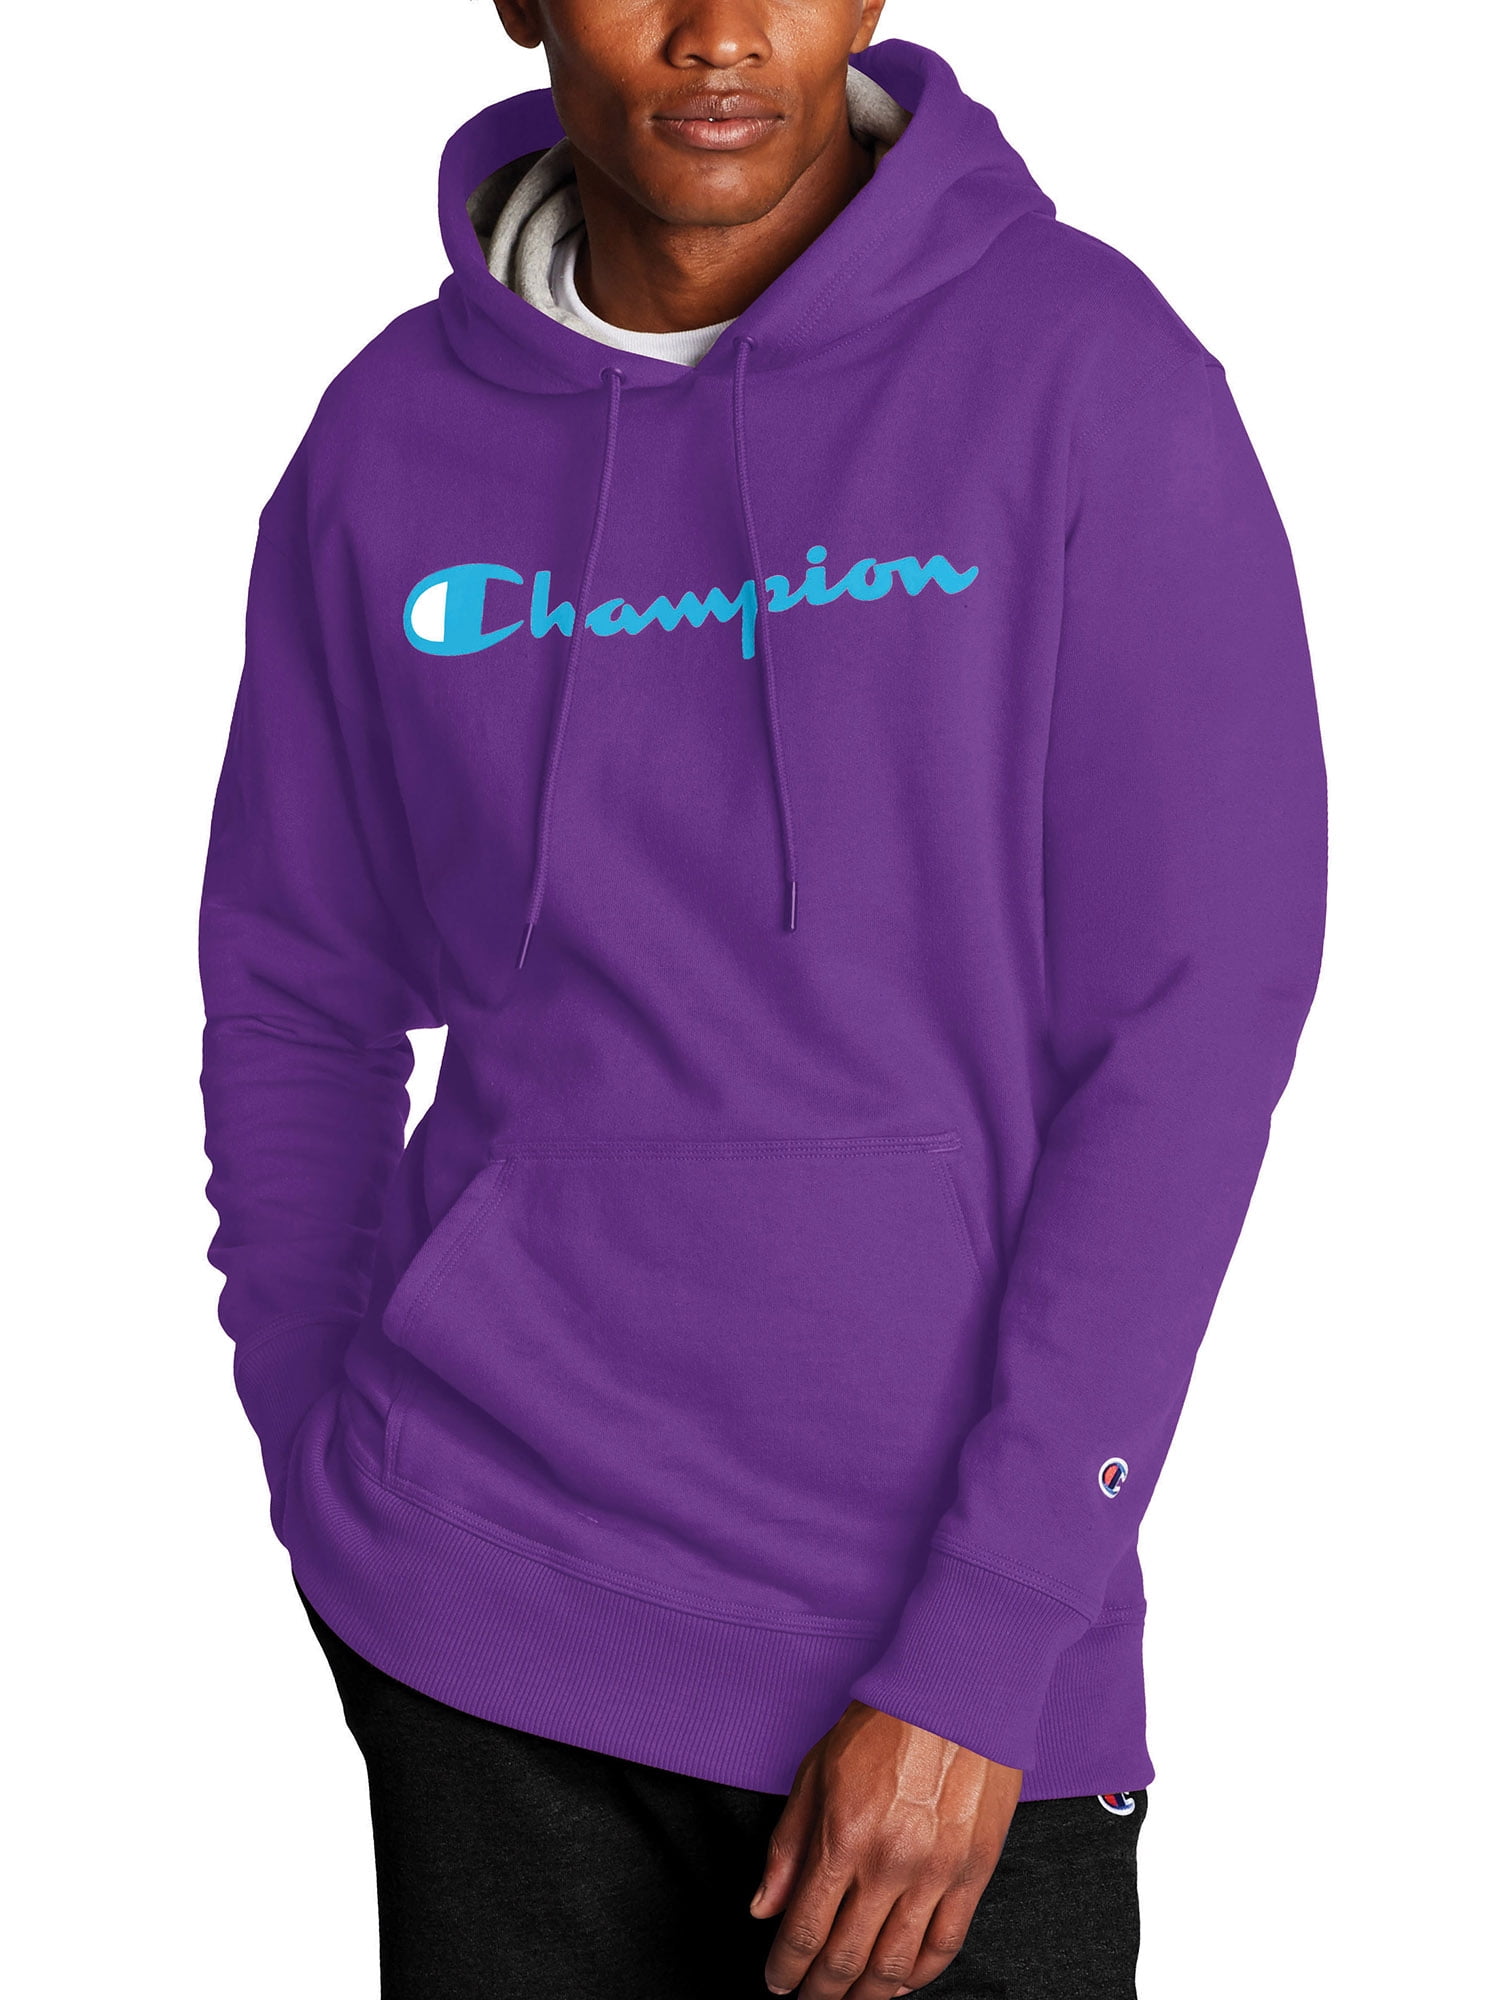 Fleece Pullover Hoodie, up to Size 2XL 